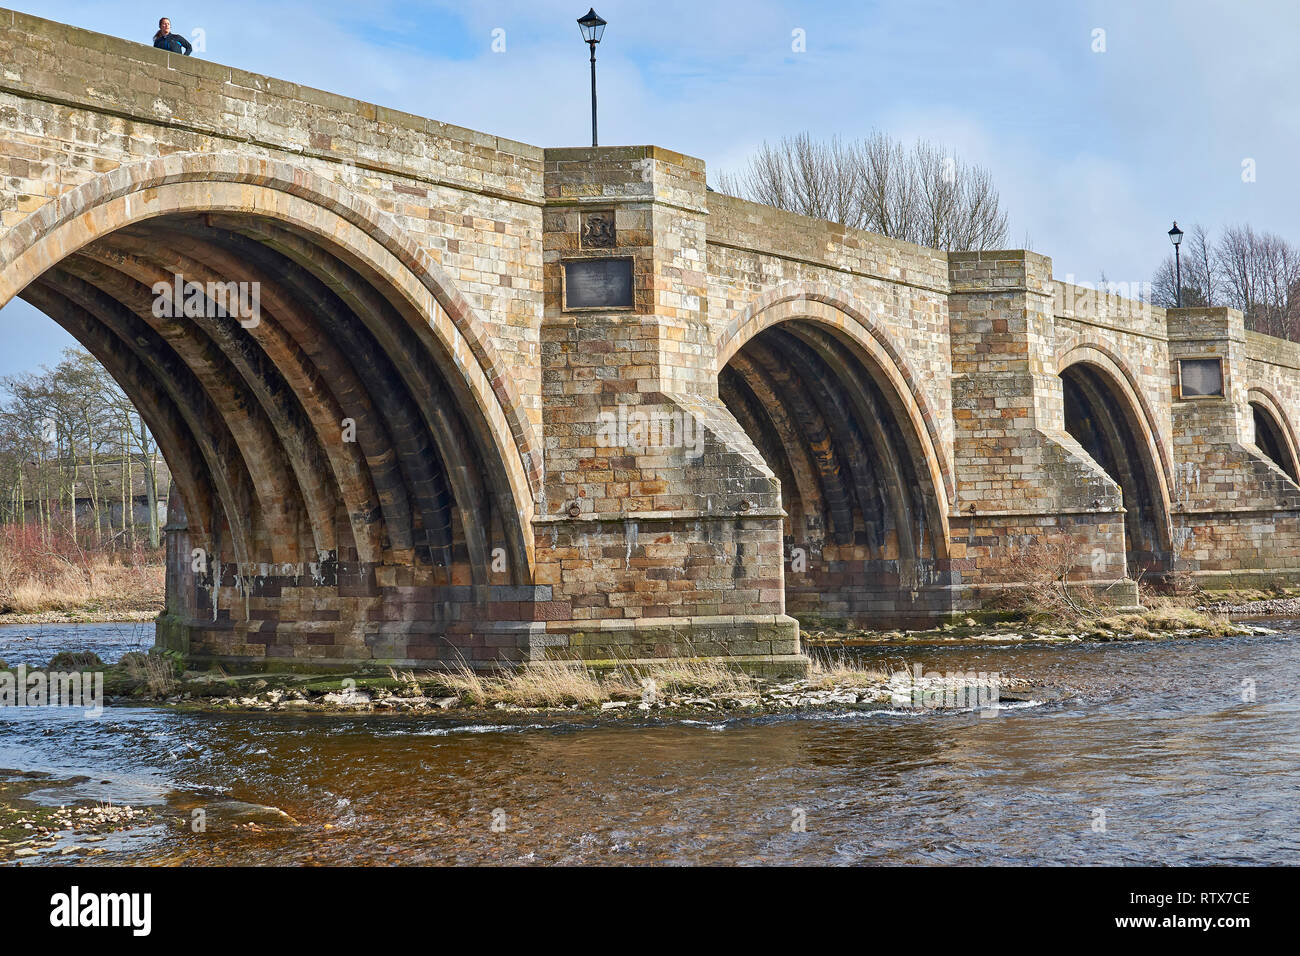 BRIDGE OF DEE A90 ROAD OVER RIVER DEE ABERDEEN SCOTLAND THE ARCHES OF THE OLD BRIDGE ON THE UPSTREAM SIDE Stock Photo